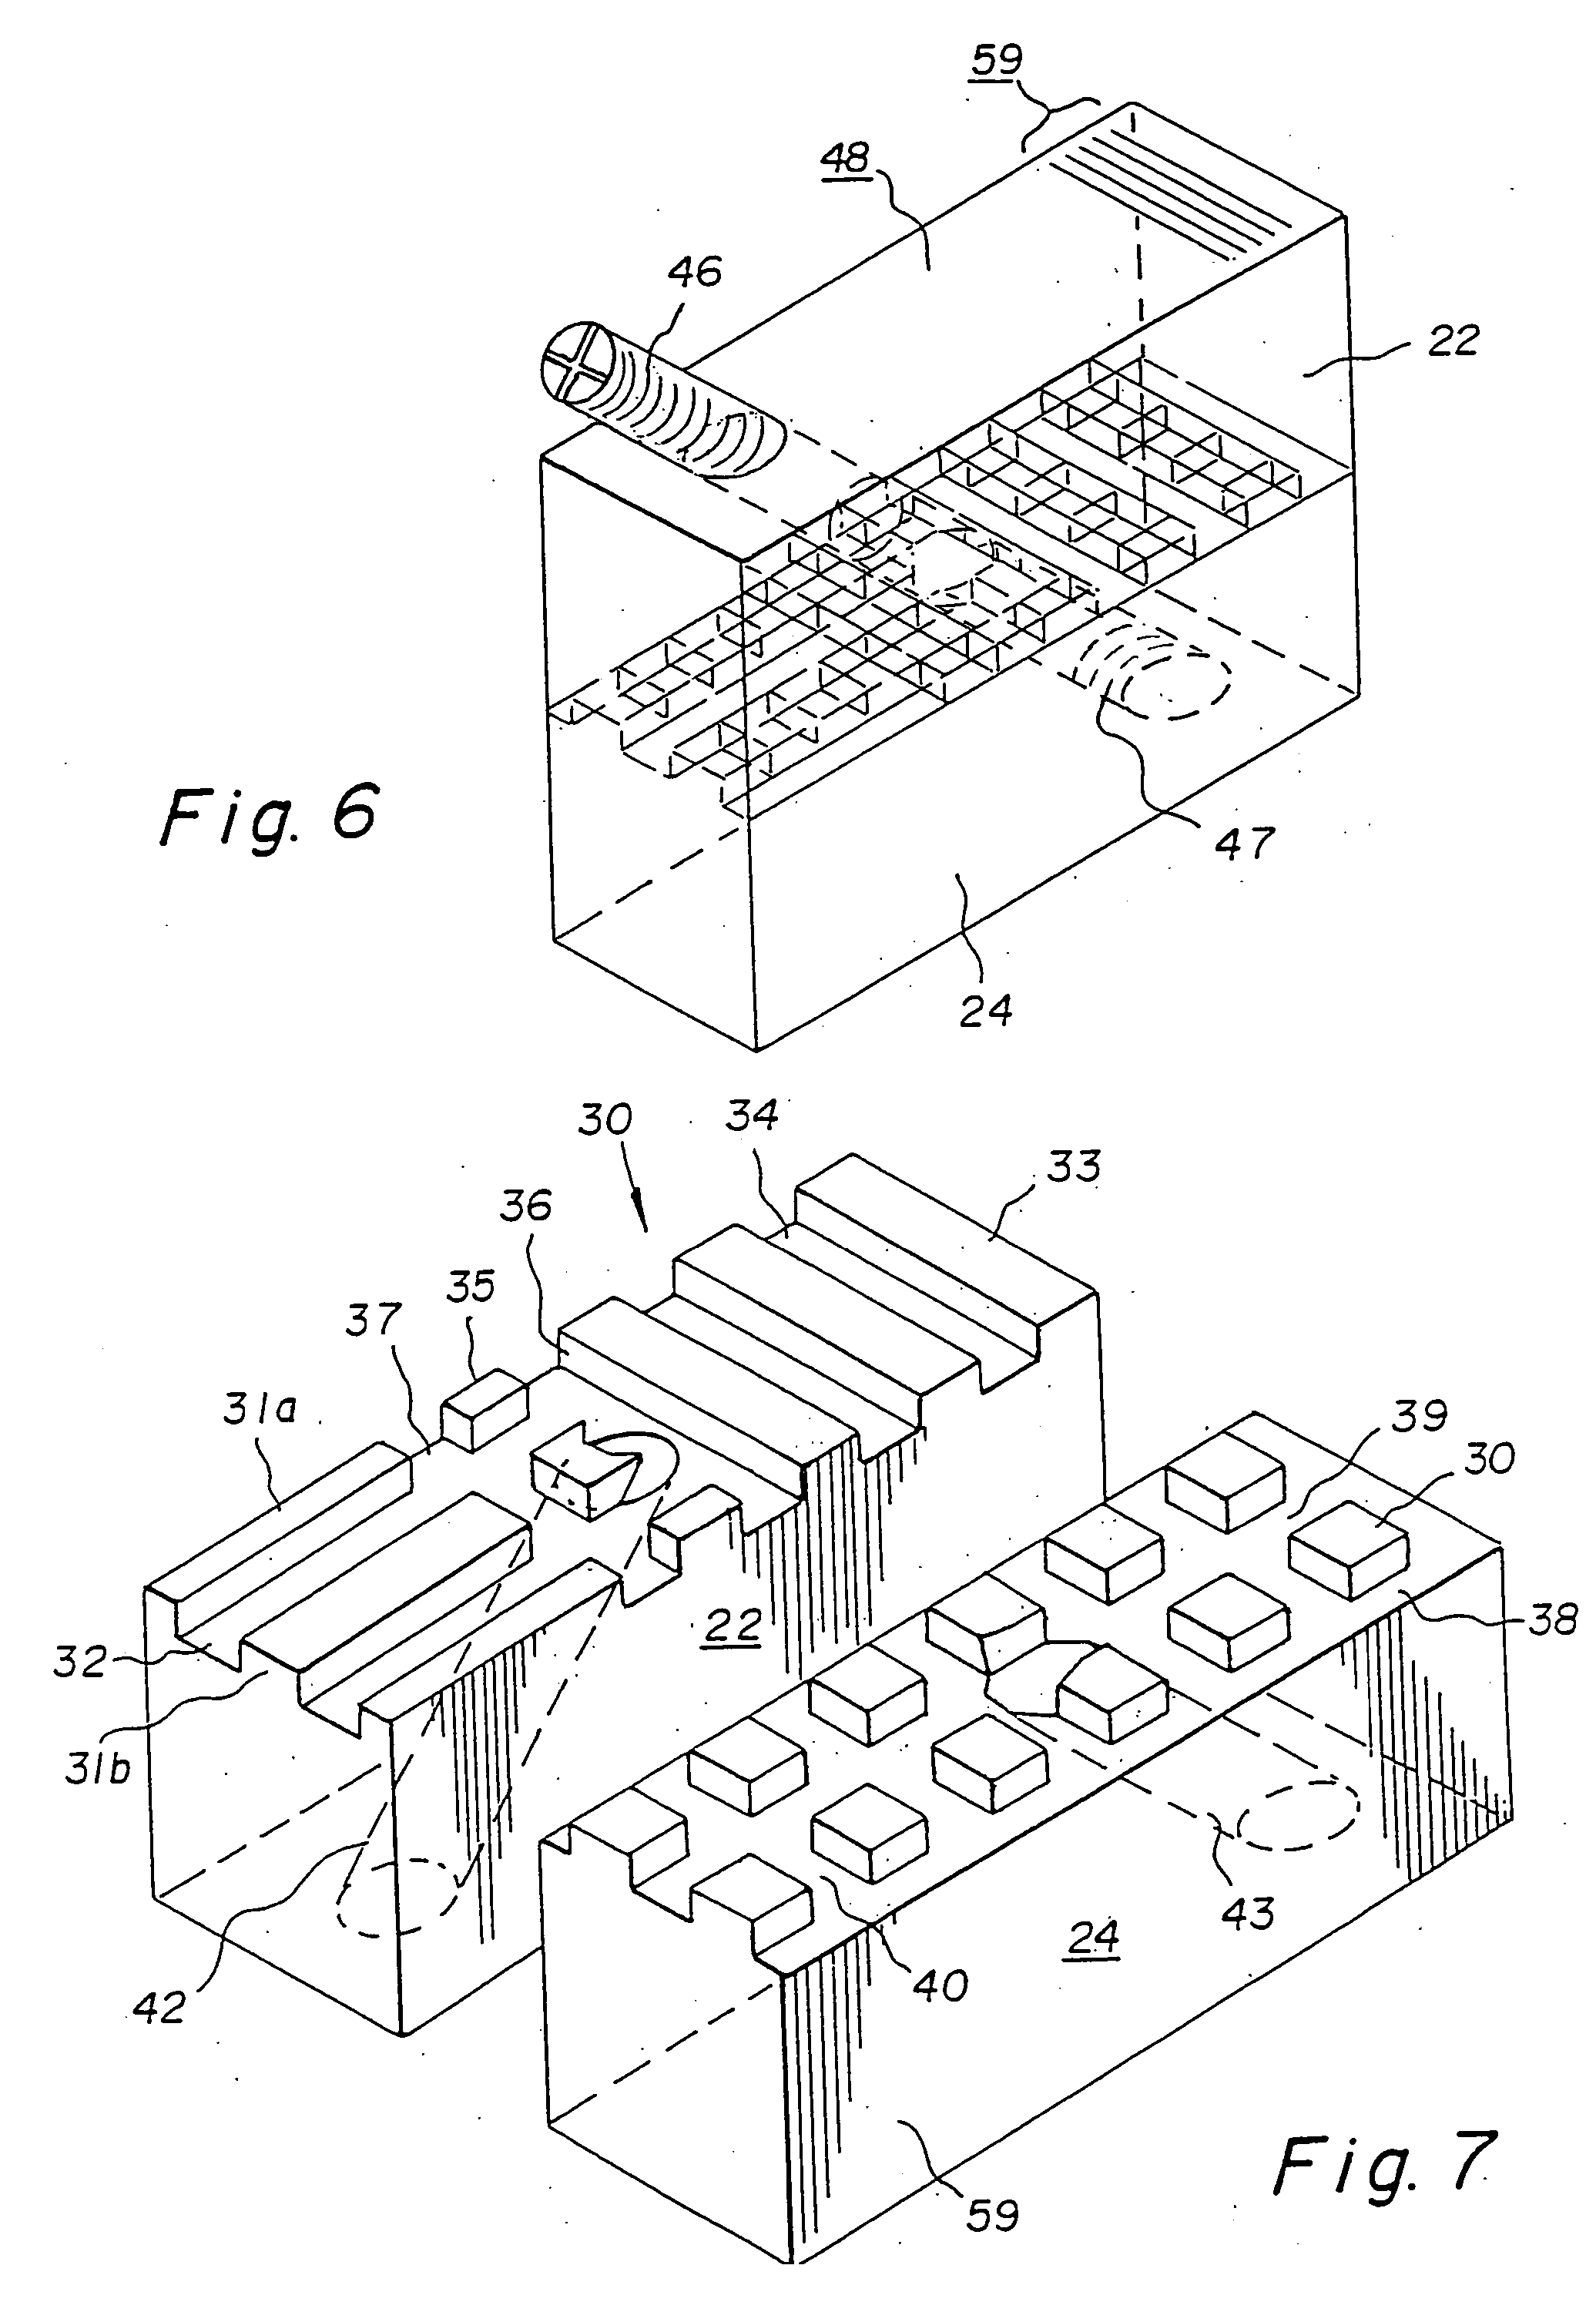 Compound bone structure of allograft tissue with threaded fasteners